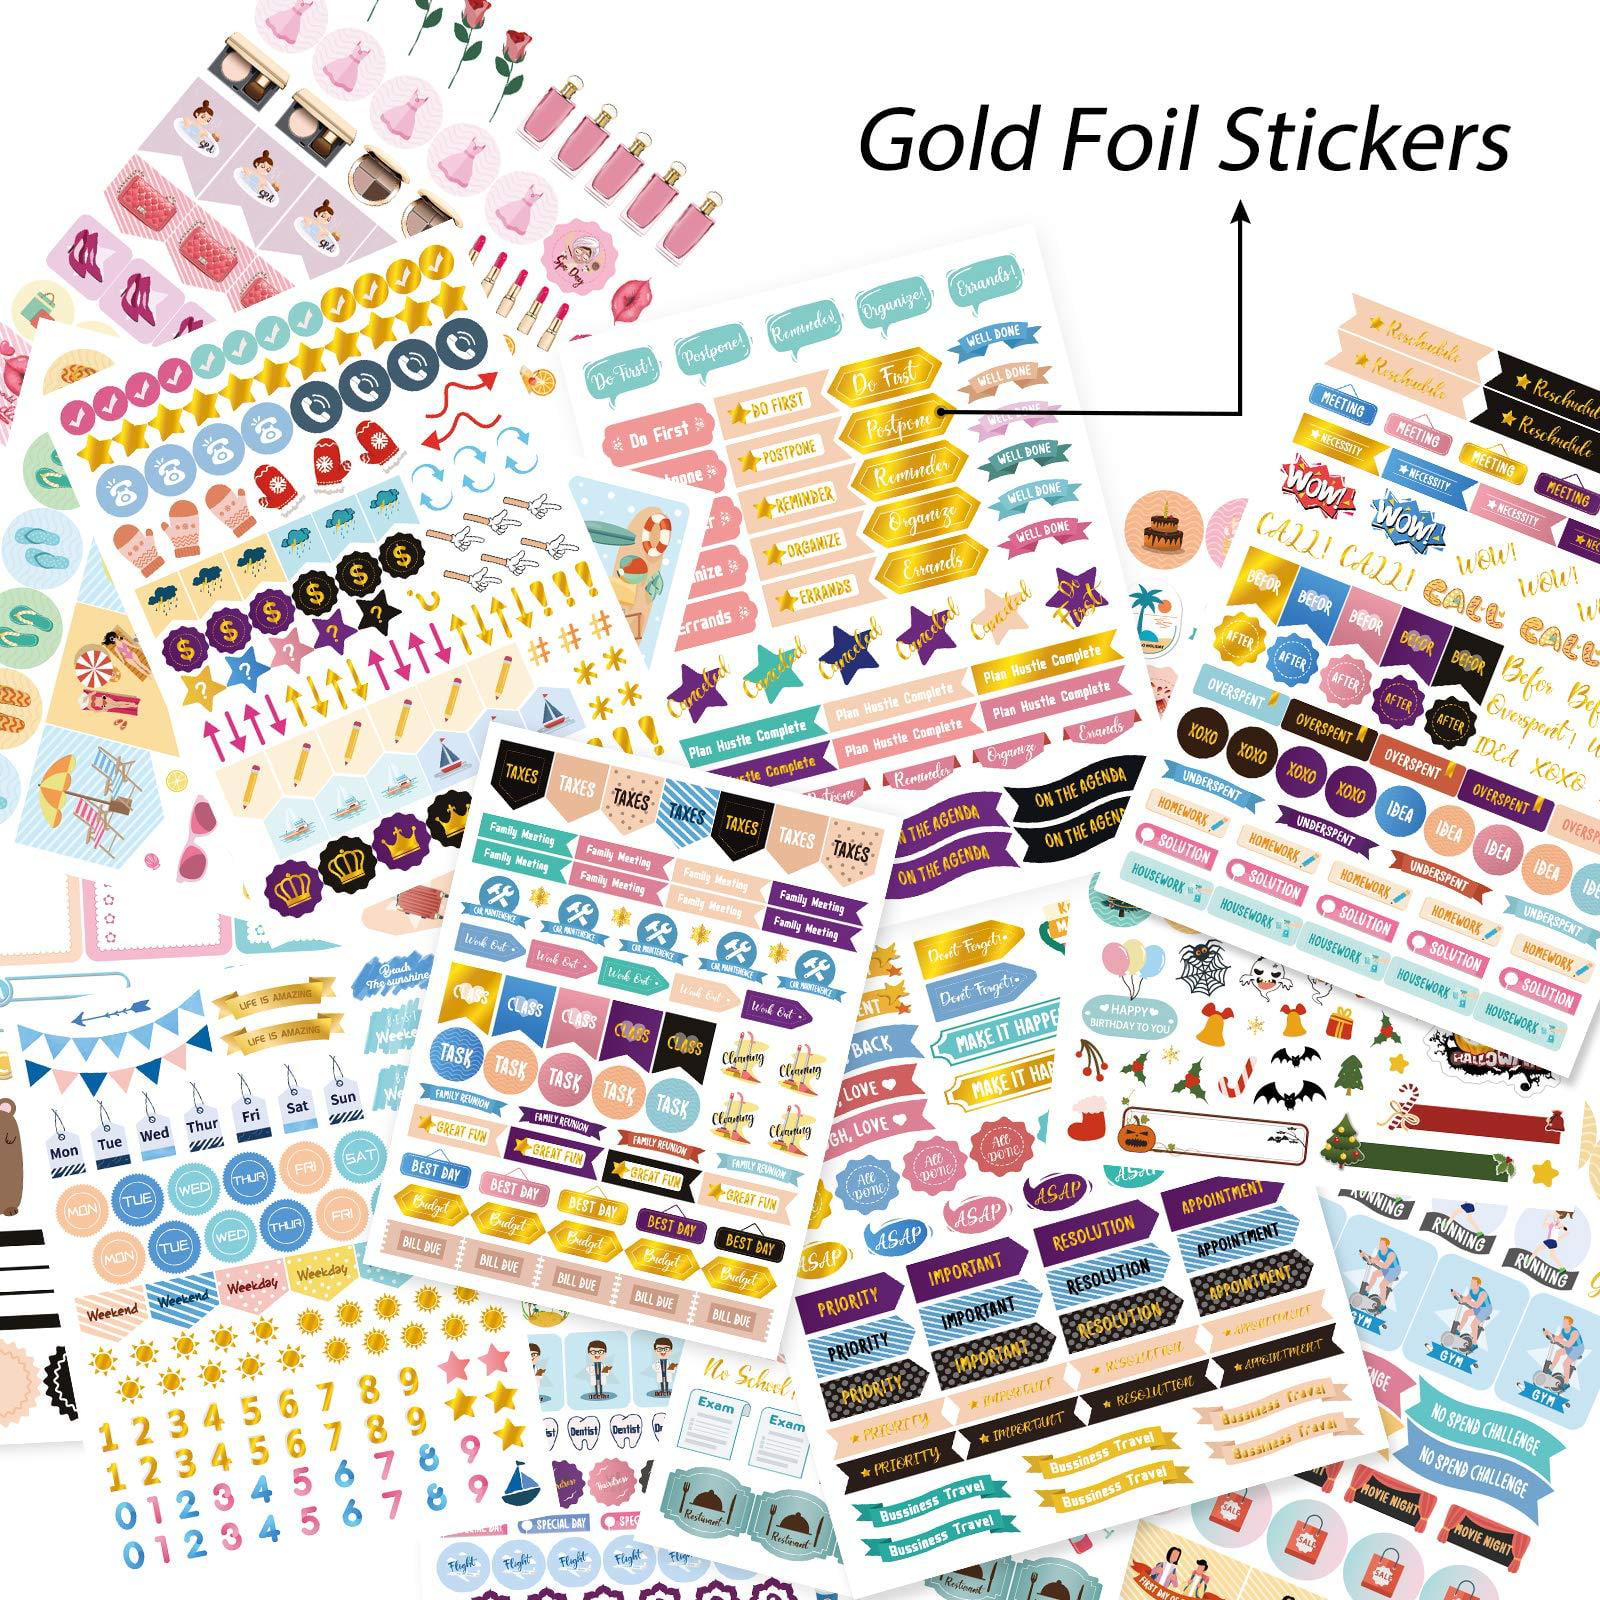 Aesthetic Gold Foil Planner Stickers - 1250+ Stunning Design Accessories  Enhance and Simplify Your Planner, Journal and Calendar